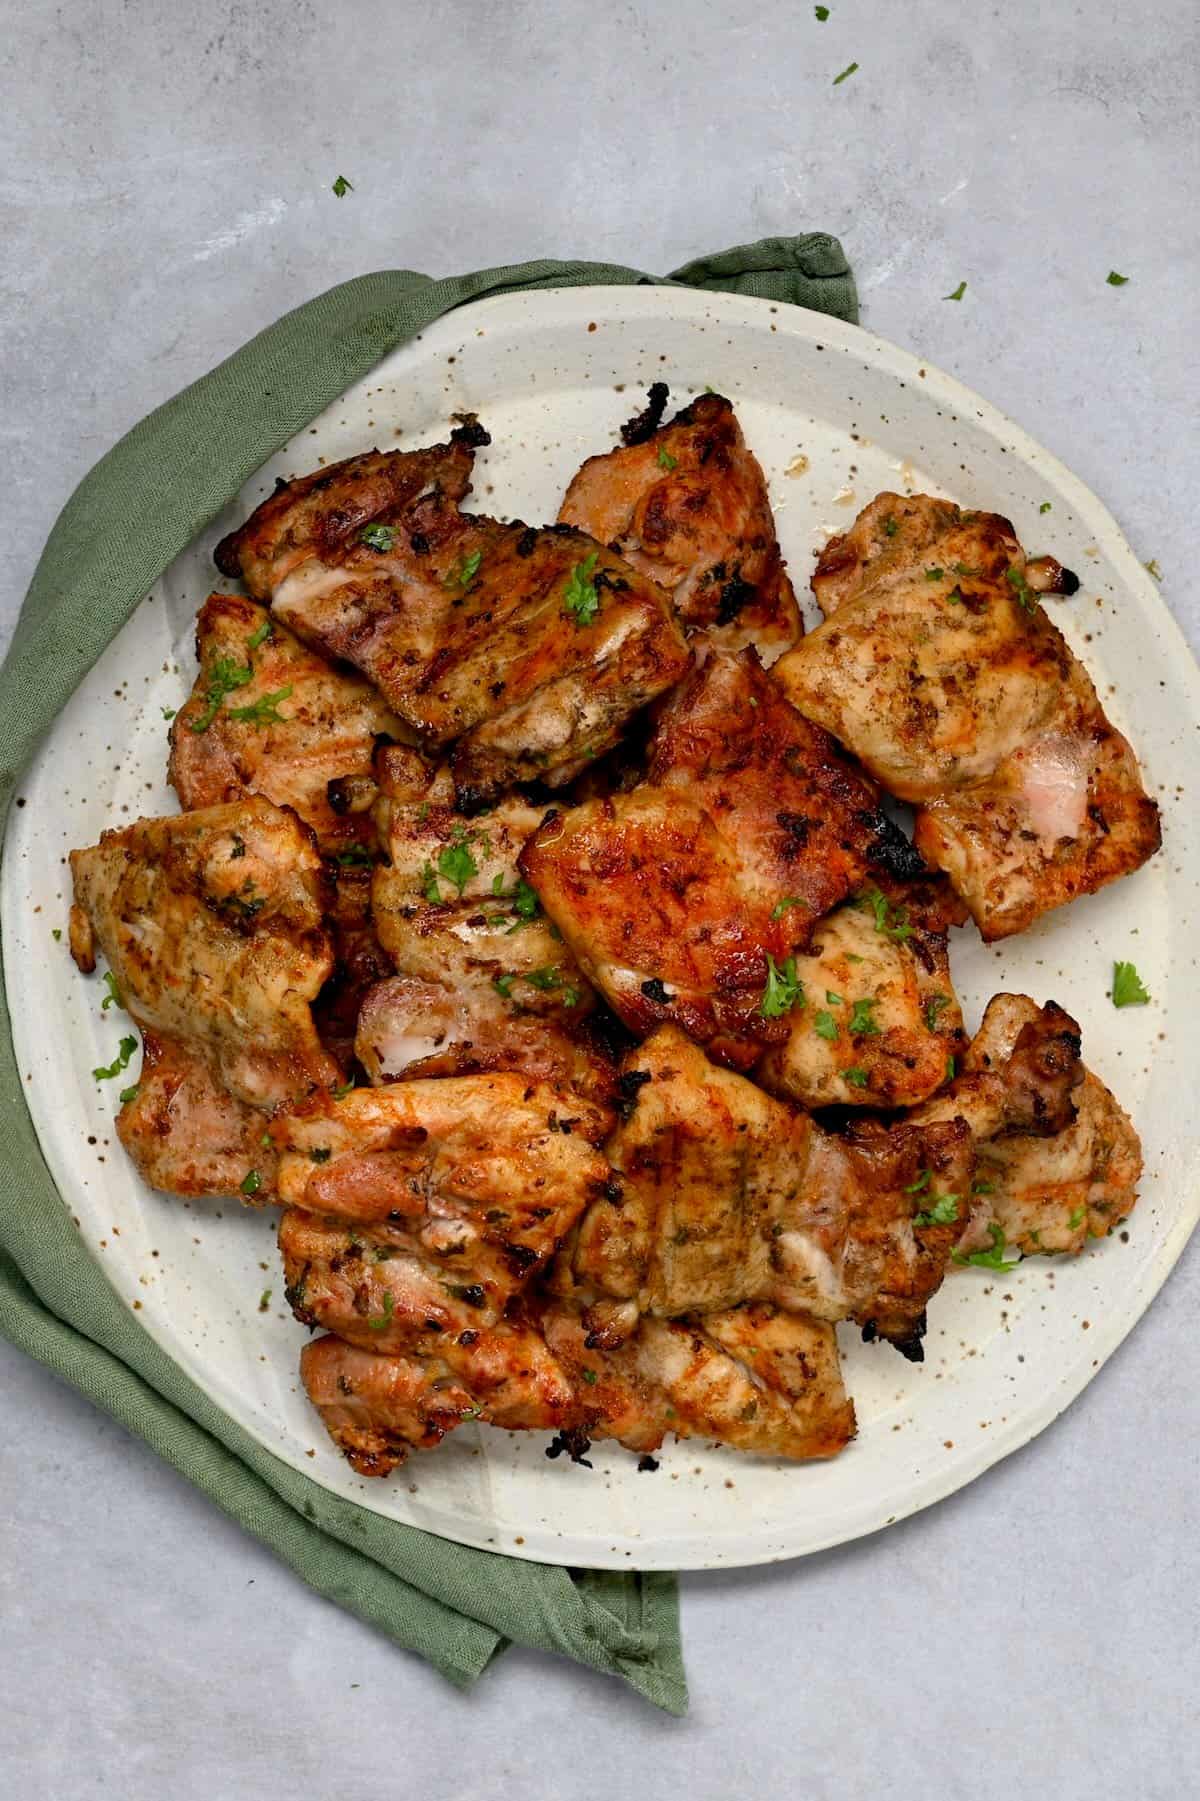 Grilled chicken thighs on a serving plate